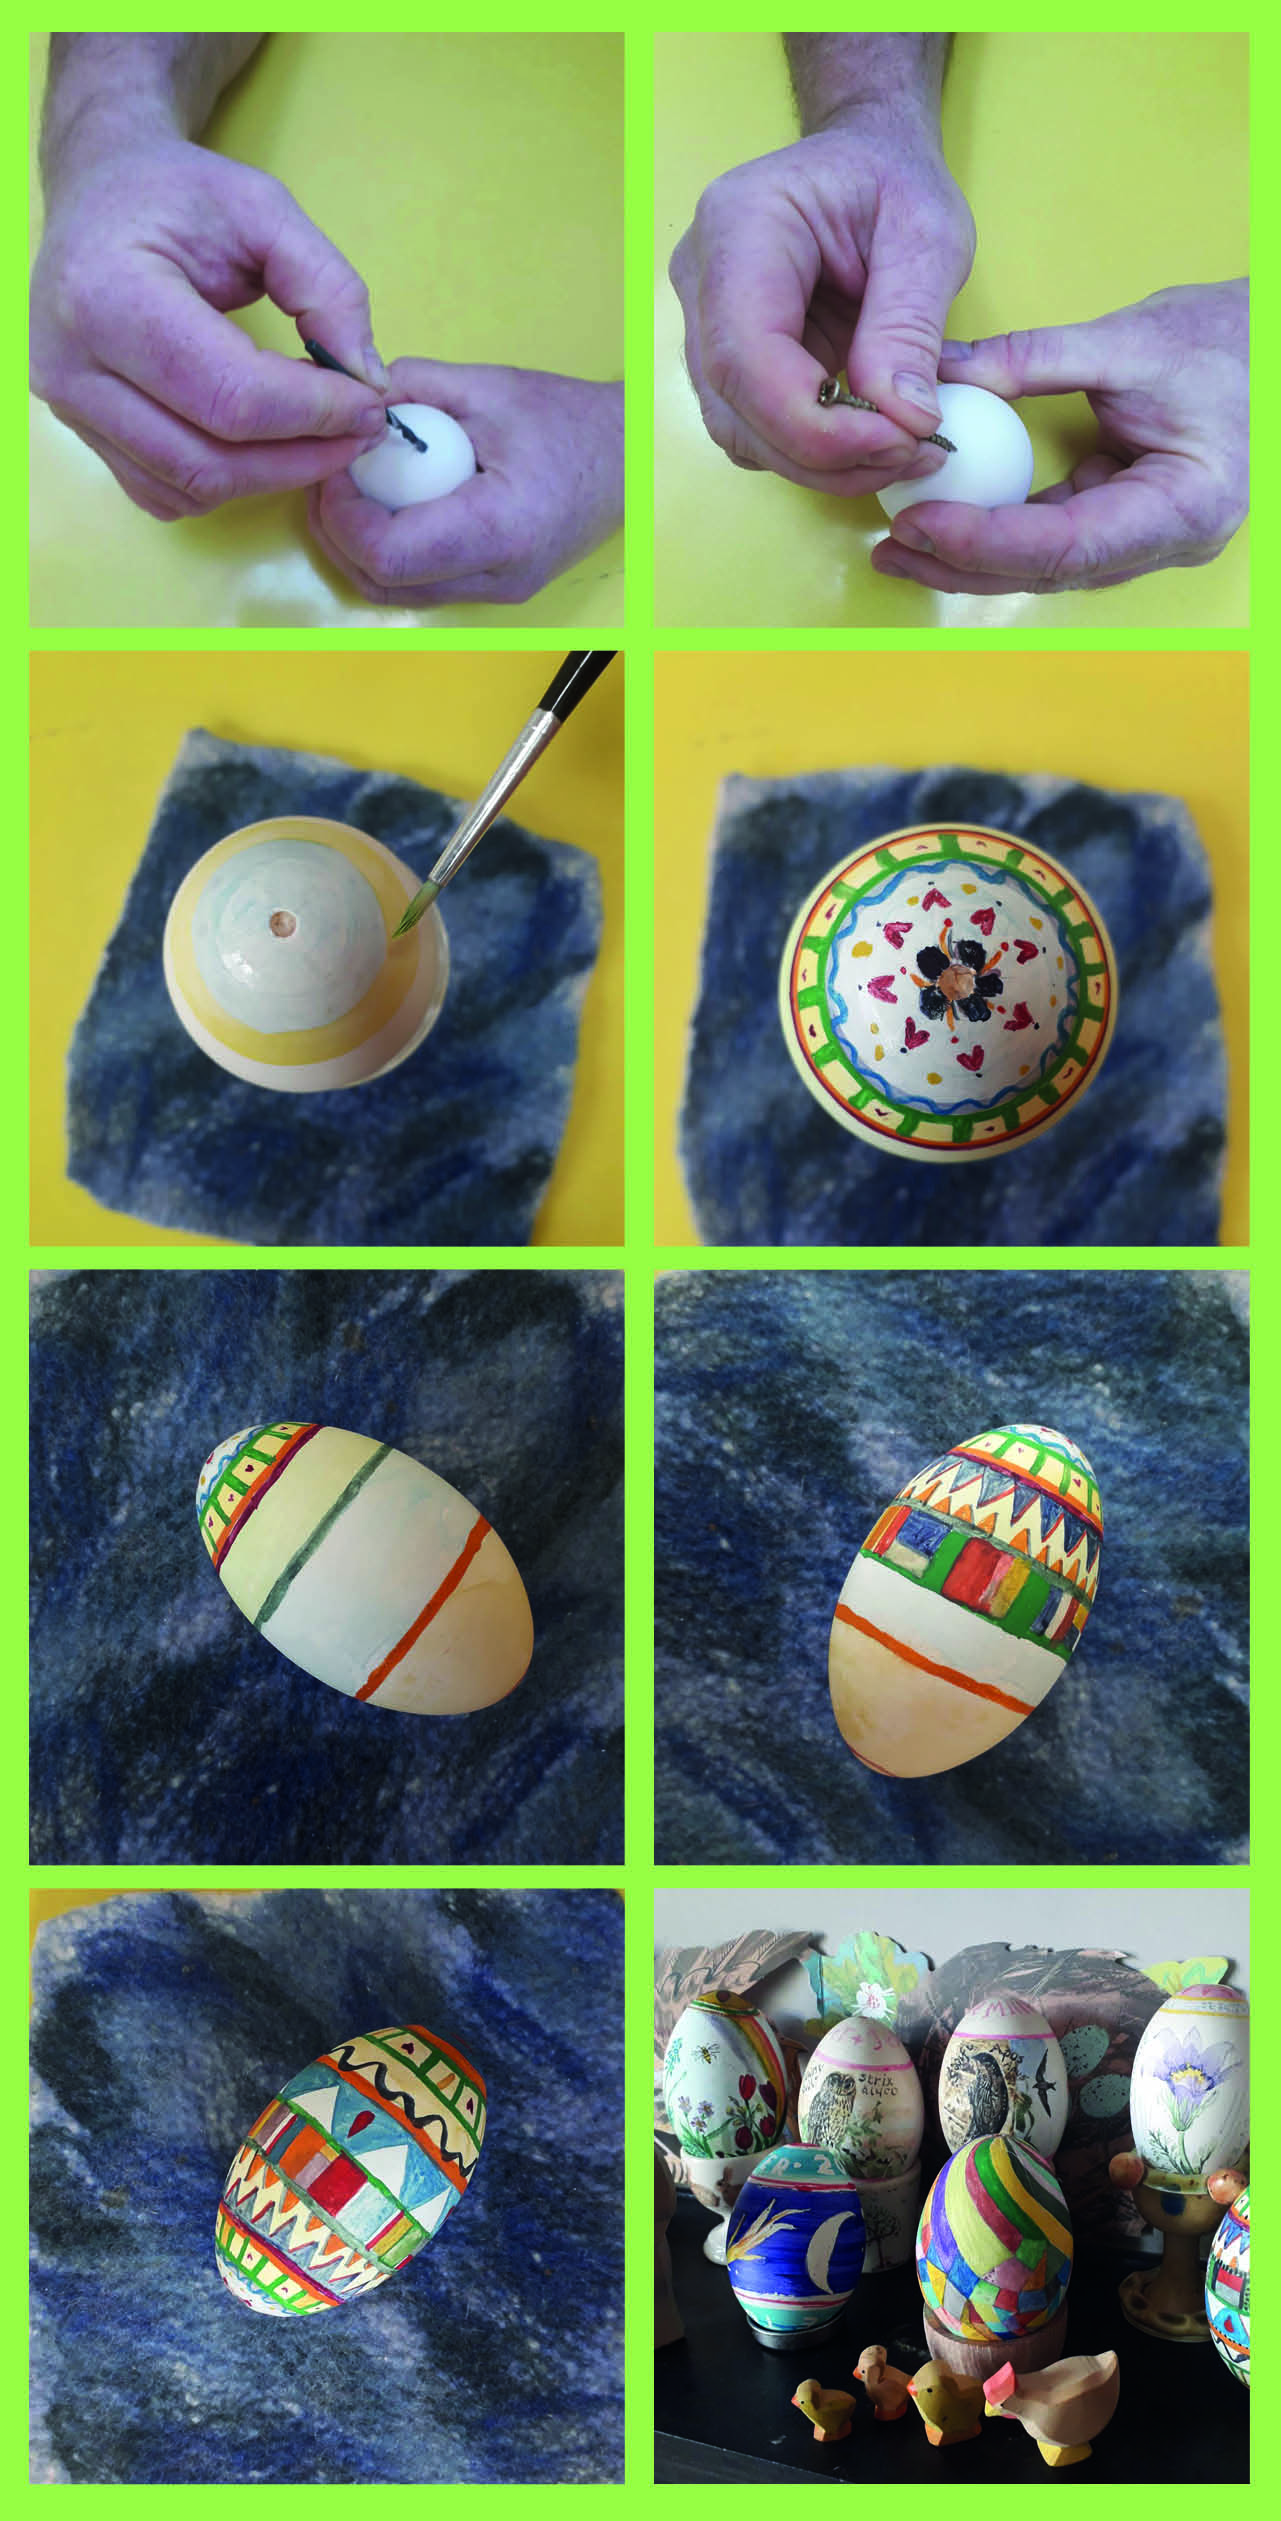 If you have decided to blow your egg, 1.Create a hole, top and bottom, of your egg to blow out the contents into a bowl. 2. Decorate the egg with patterns and stripes, decorate all around. 3. Wait for egg to dry and then display.